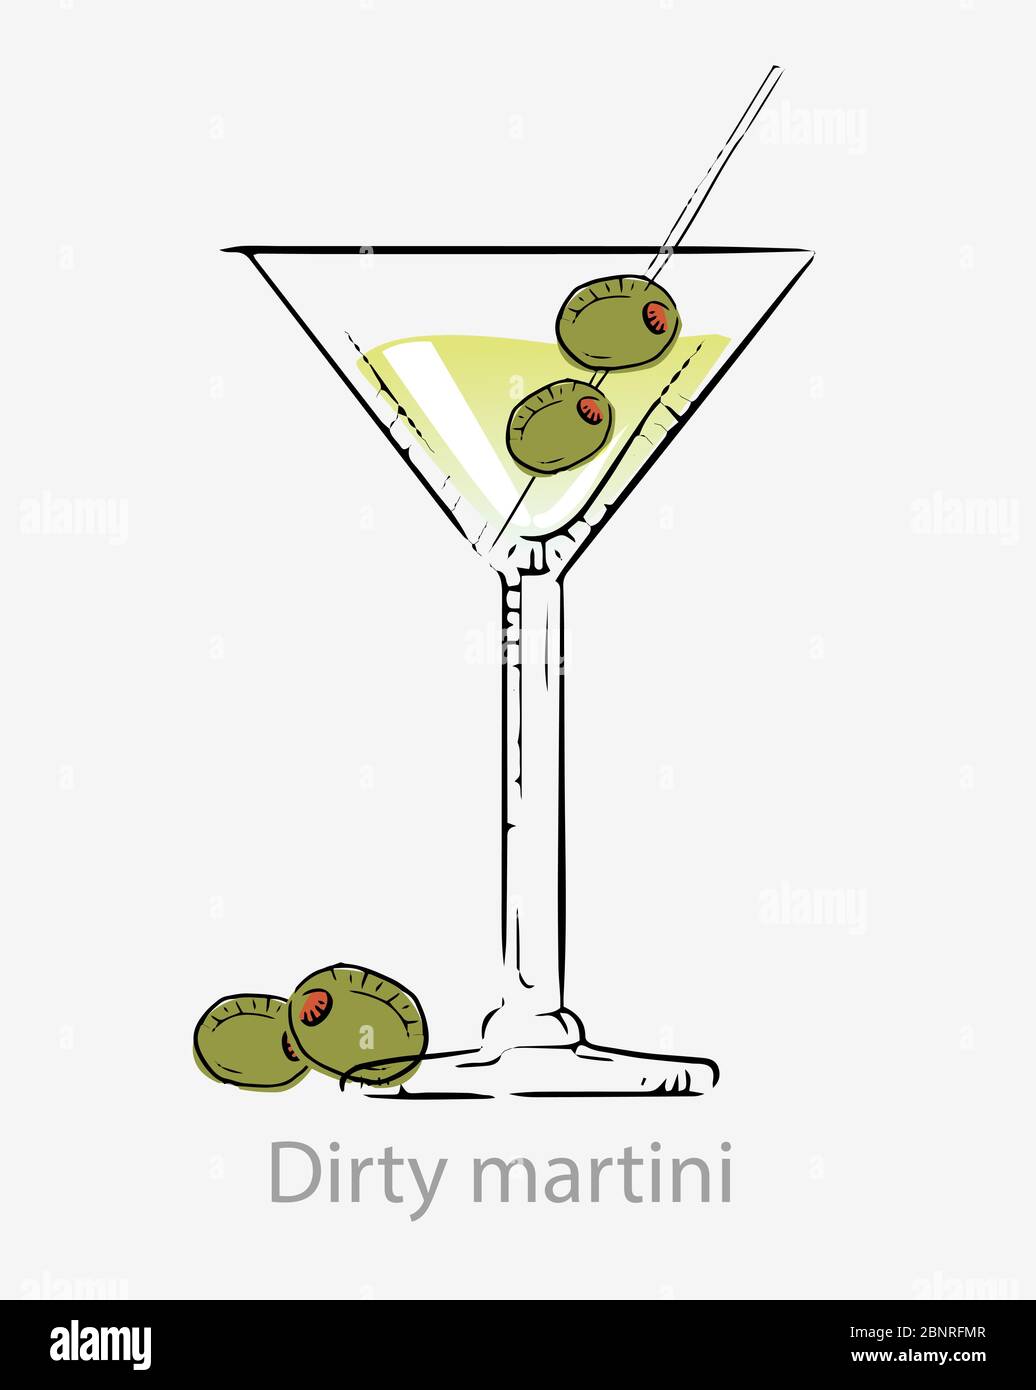 Dirty martini cocktail. Cocktail green with olives stick, alcoholic aperitif based vodka/ Stock Vector